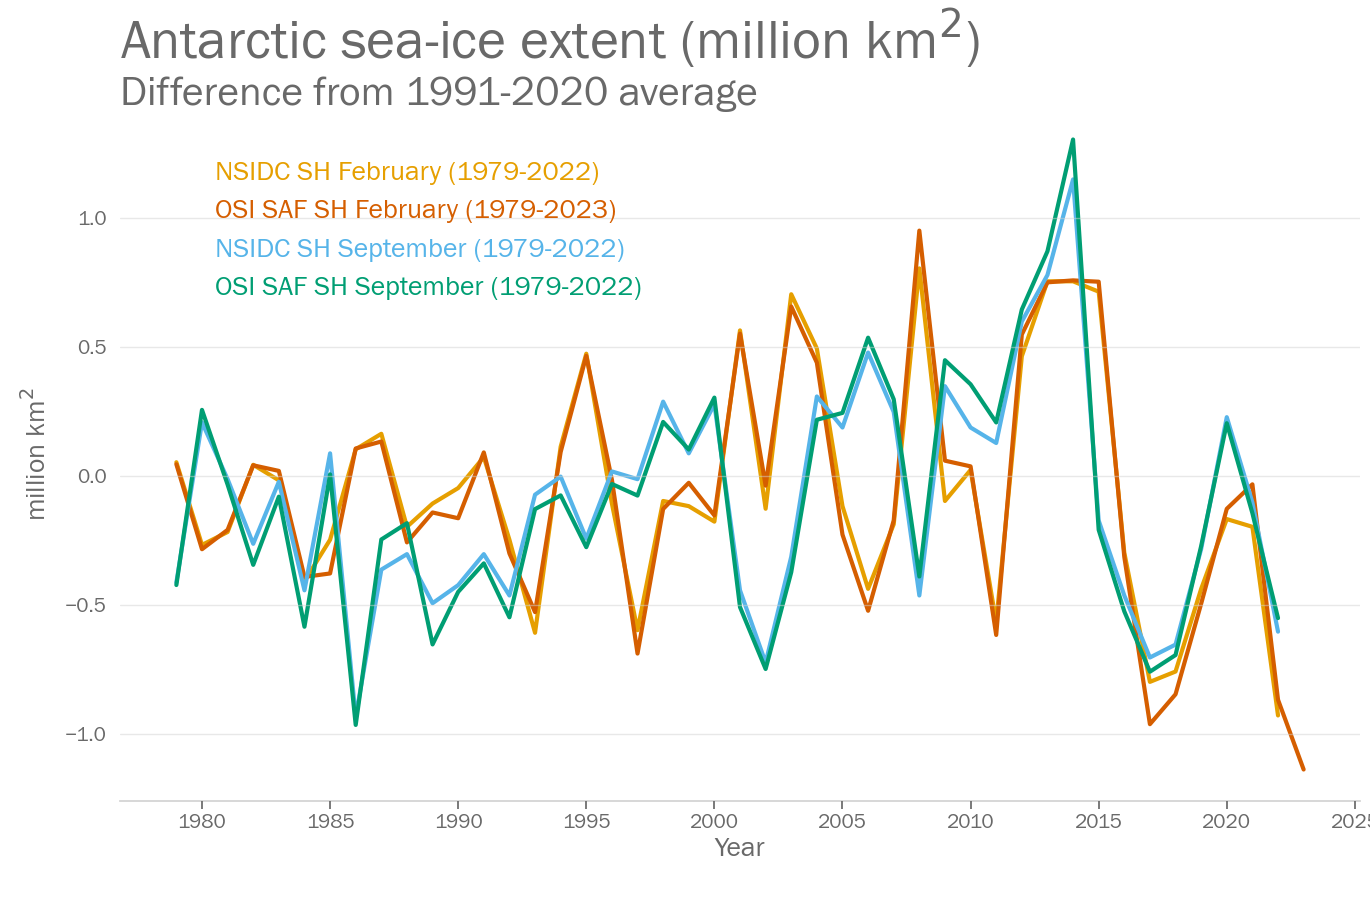 Antarctic sea ice extent (shown as differences from the 1991-2020 average) from 1979 to 2022. Two months are shown - September and February - at the annual maximum and minimum extents respectively.